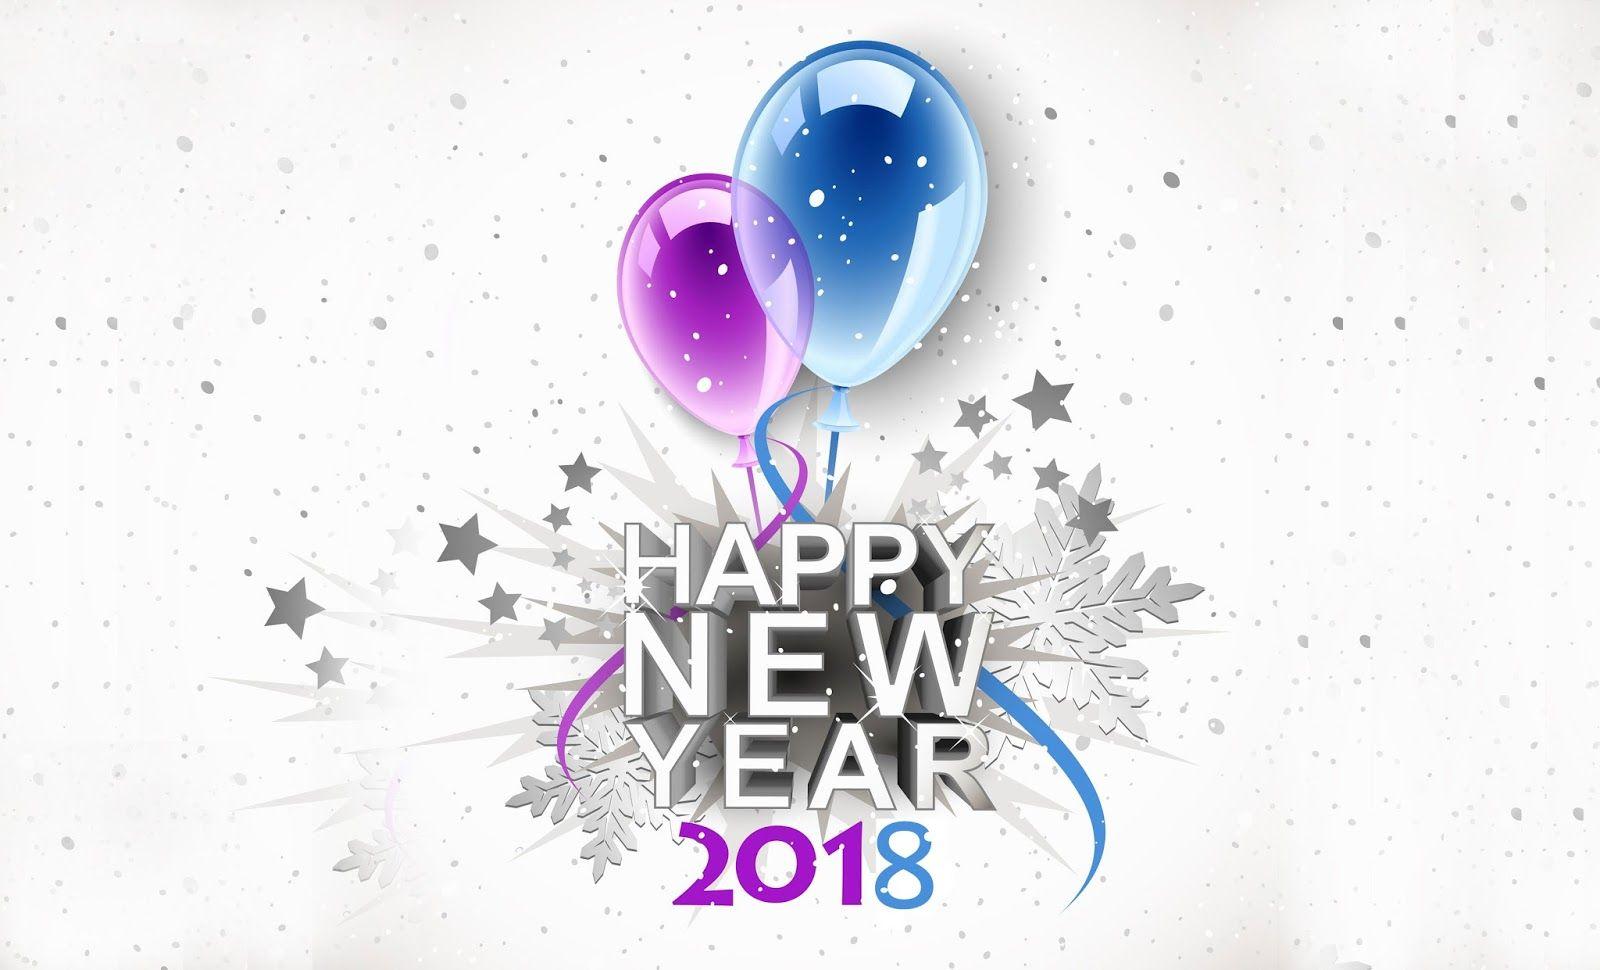 Good Bye 2017 Welcome 2018 New Year Wishes, Image, SMS